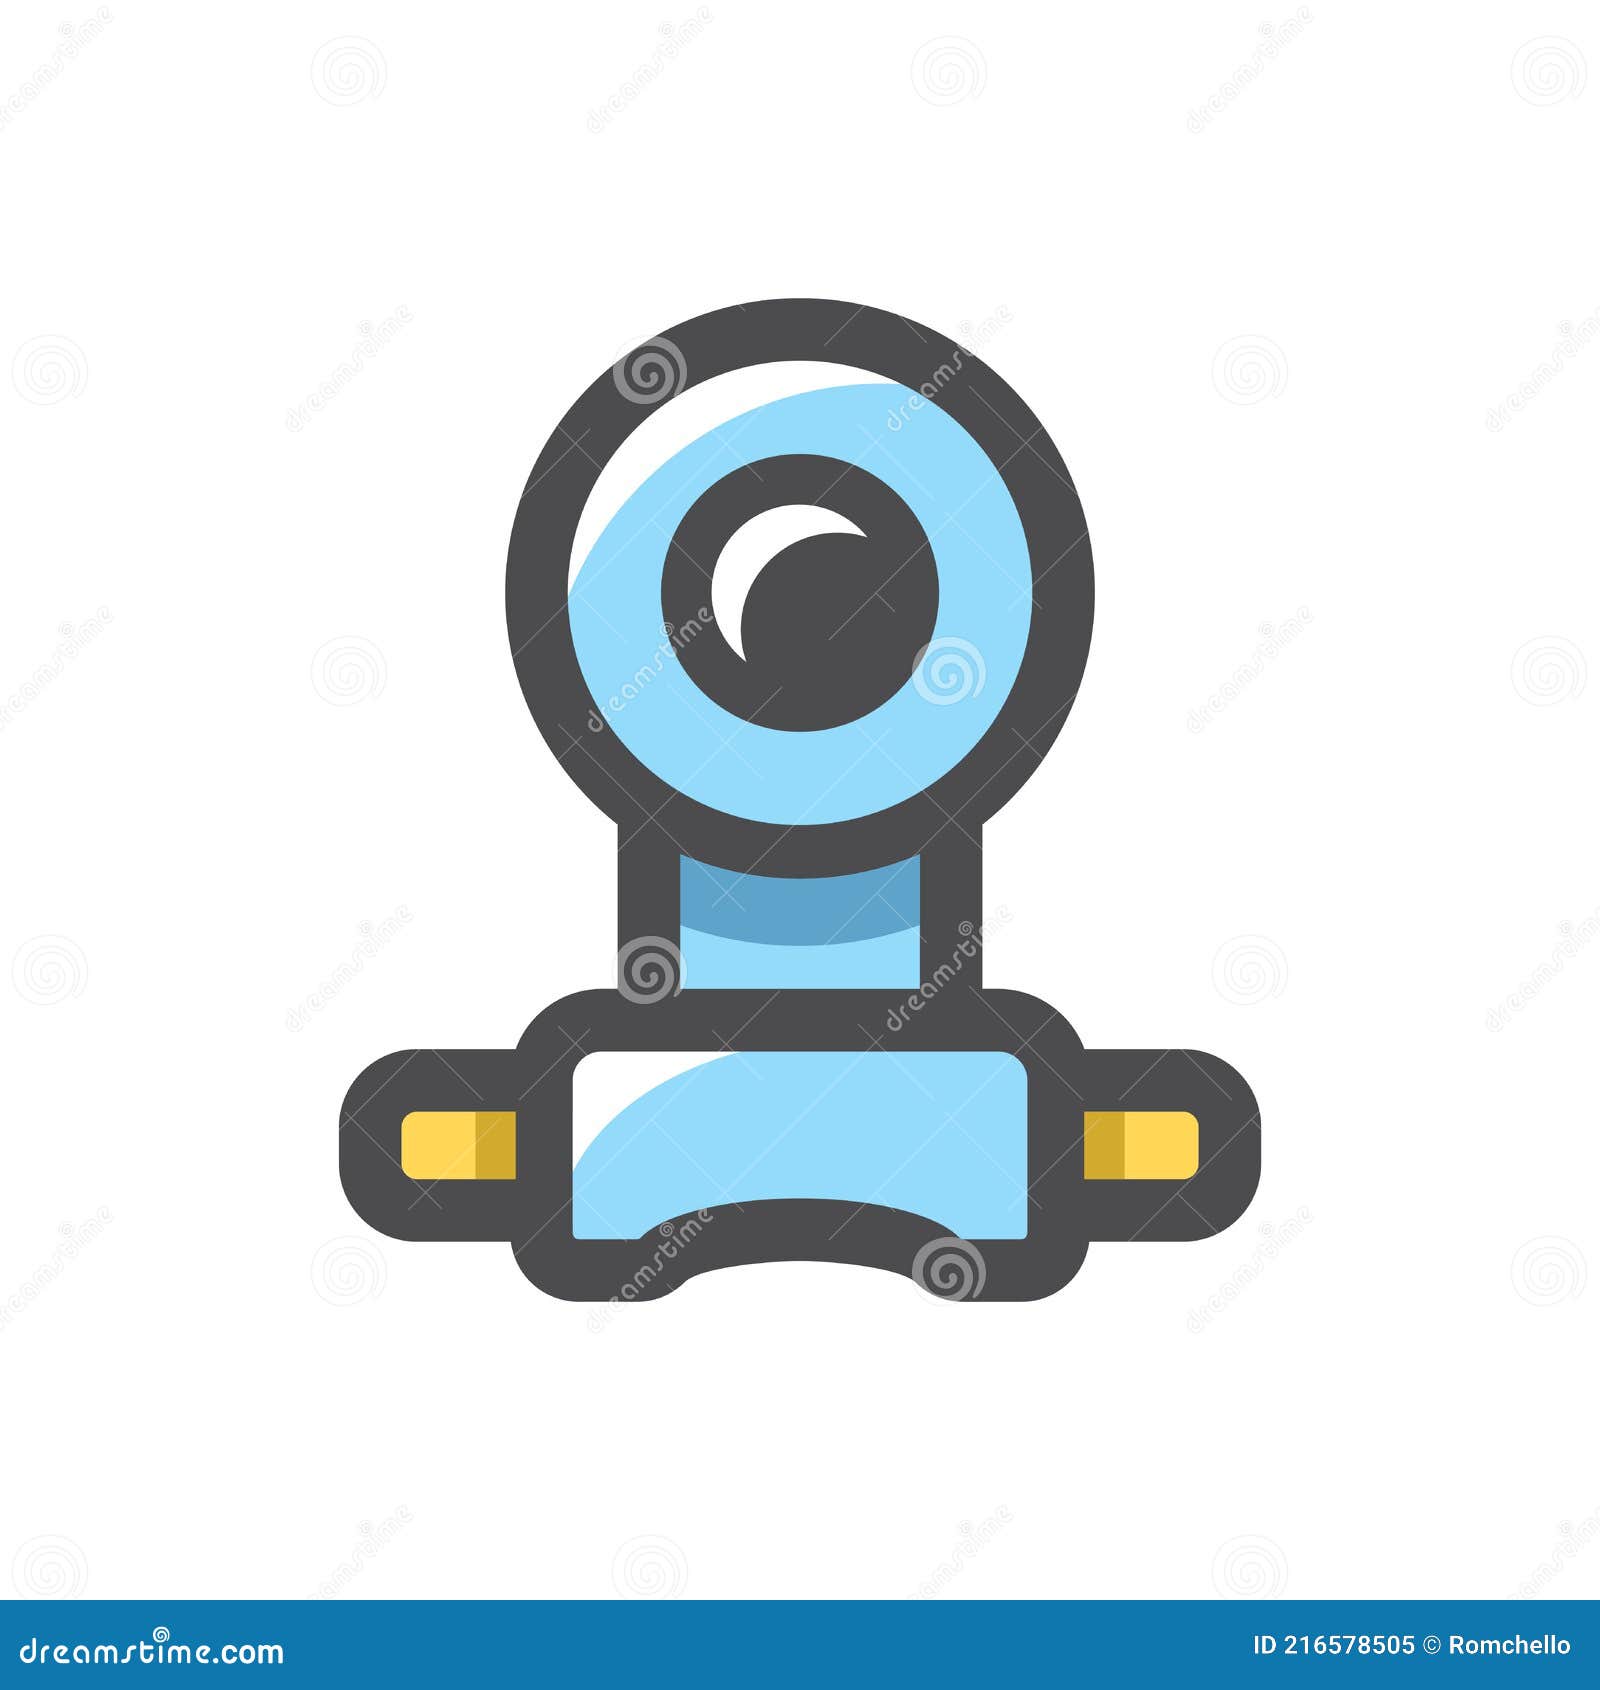 https://thumbs.dreamstime.com/z/spy-scope-underwater-vector-icon-cartoon-illustration-isolated-white-background-216578505.jpg